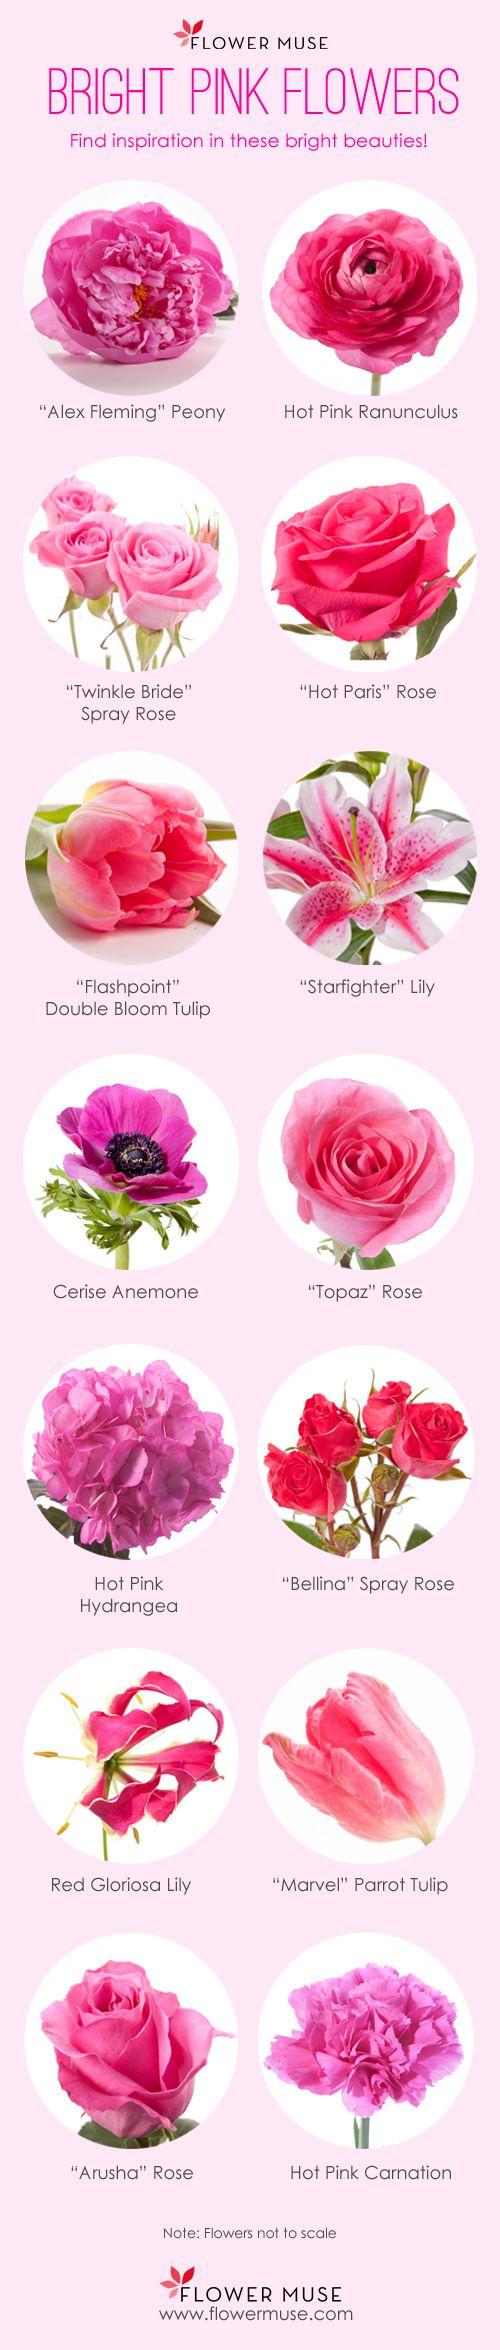 Mariage - Our Favorite: Bright Pink Flowers - Flower Muse Blog